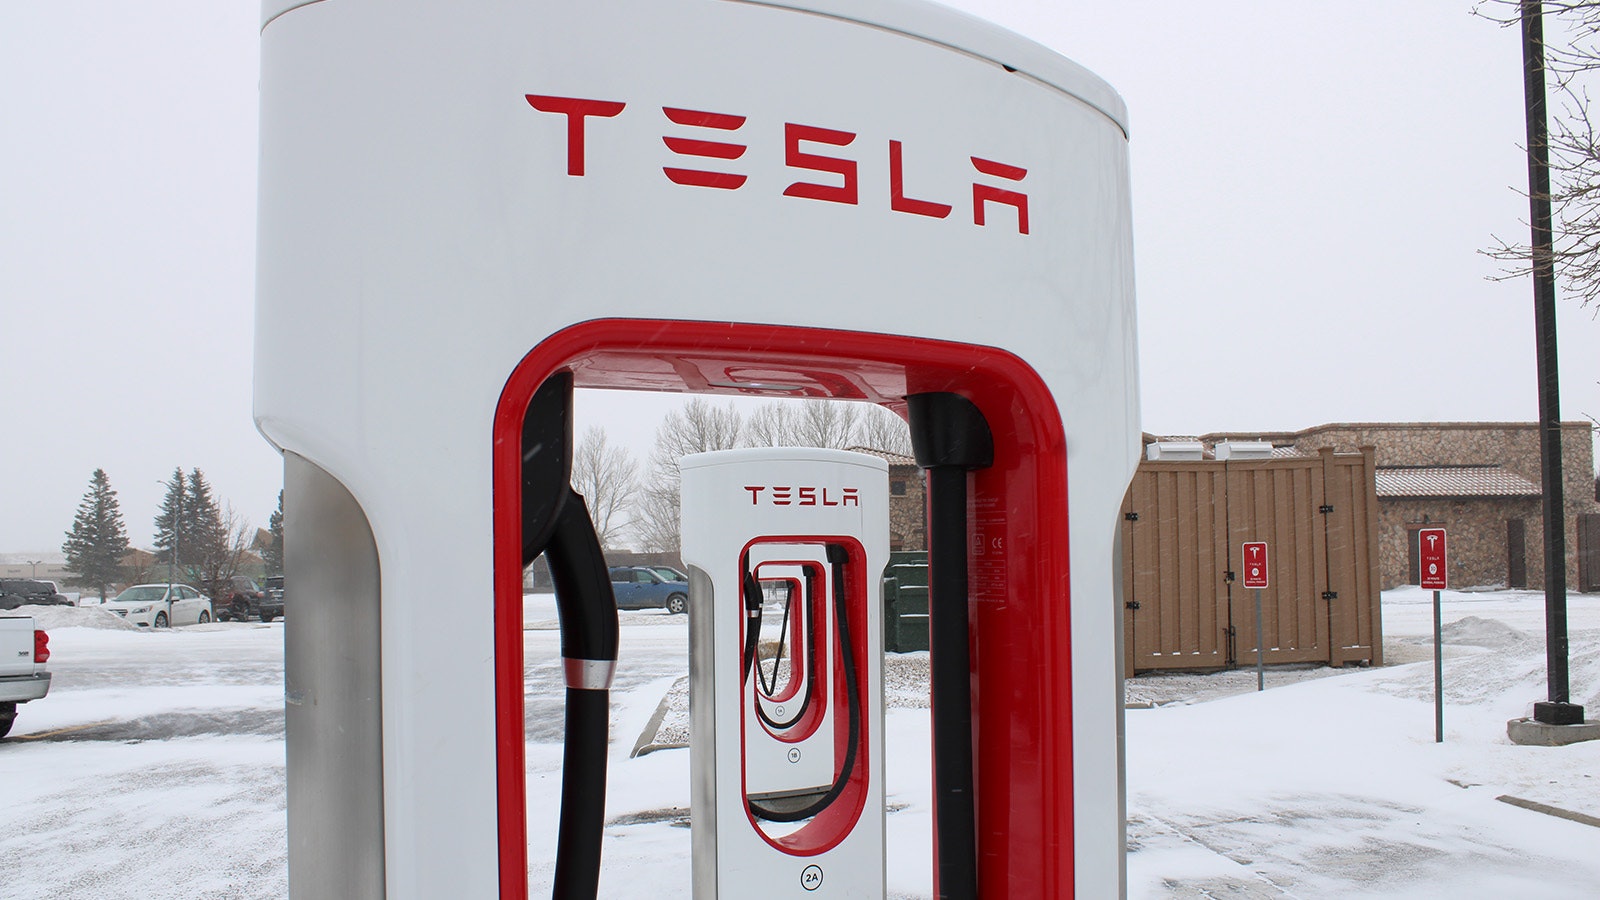 Tesla Charger in Cheyenne 4 2 15 23